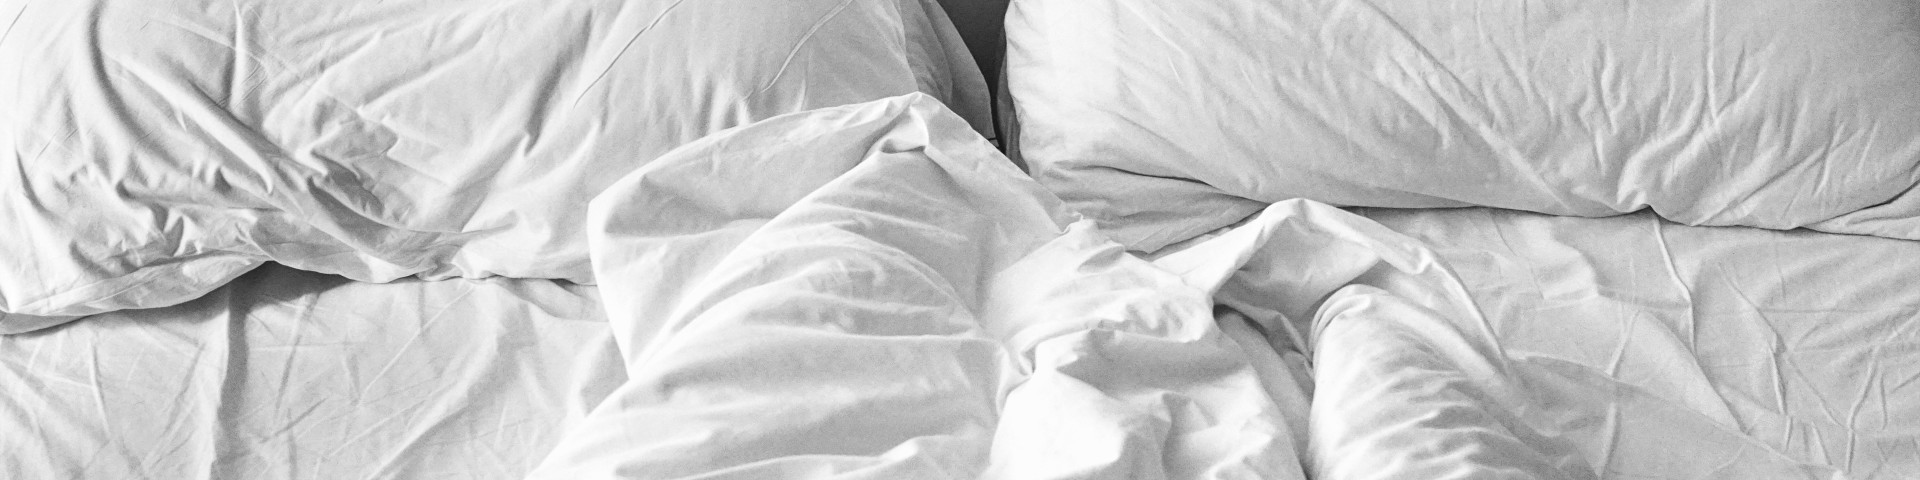 Here's why Daylight Savings time might cause some sleep problems—and how to deal with it.